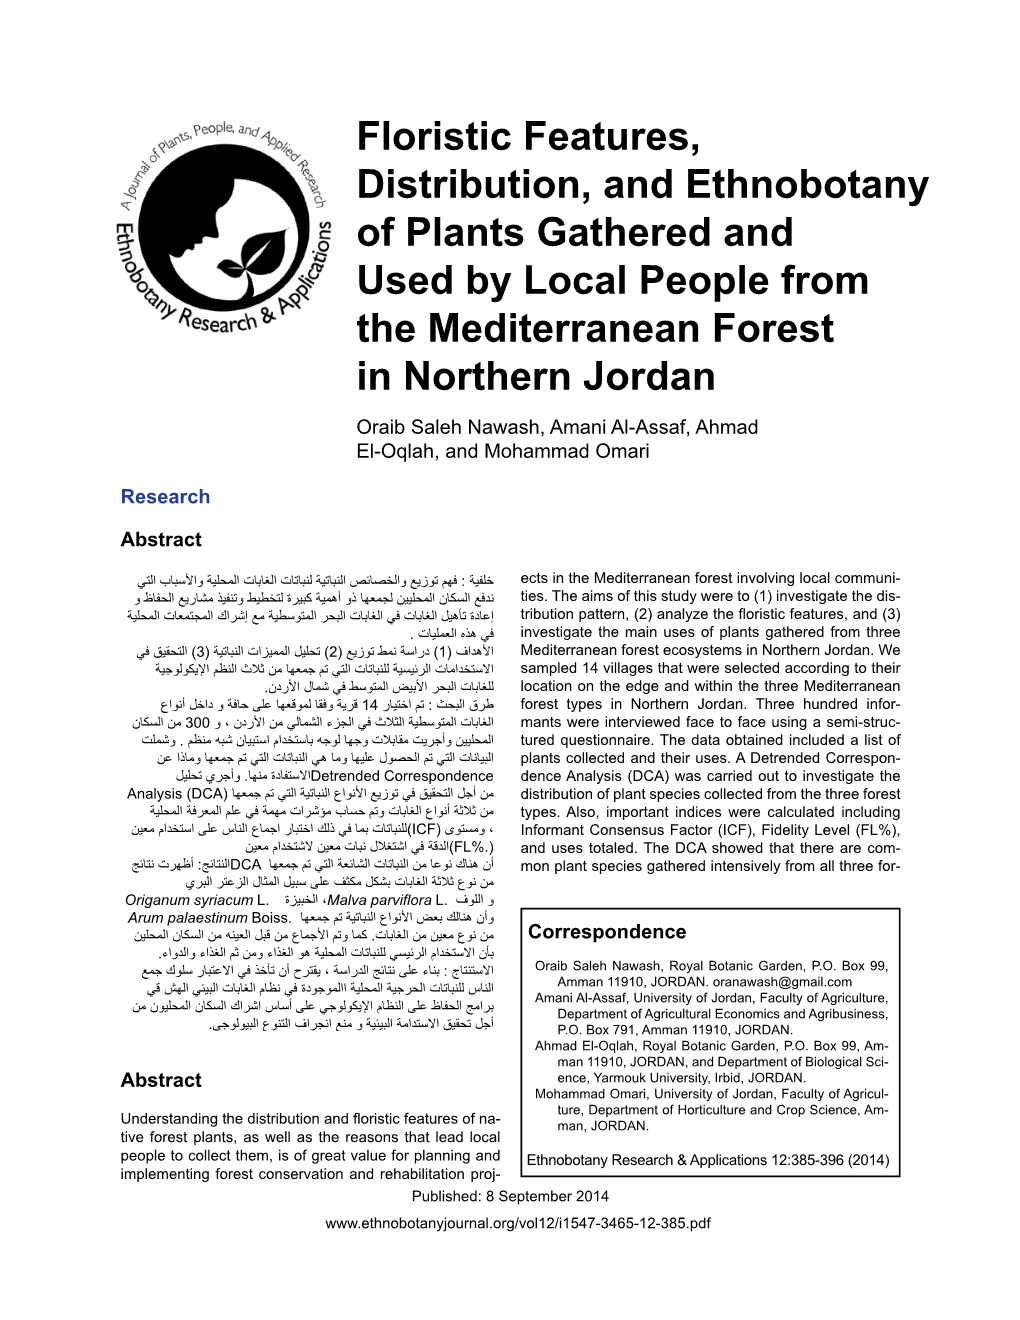 Floristic Features, Distribution, and Ethnobotany of Plants Gathered